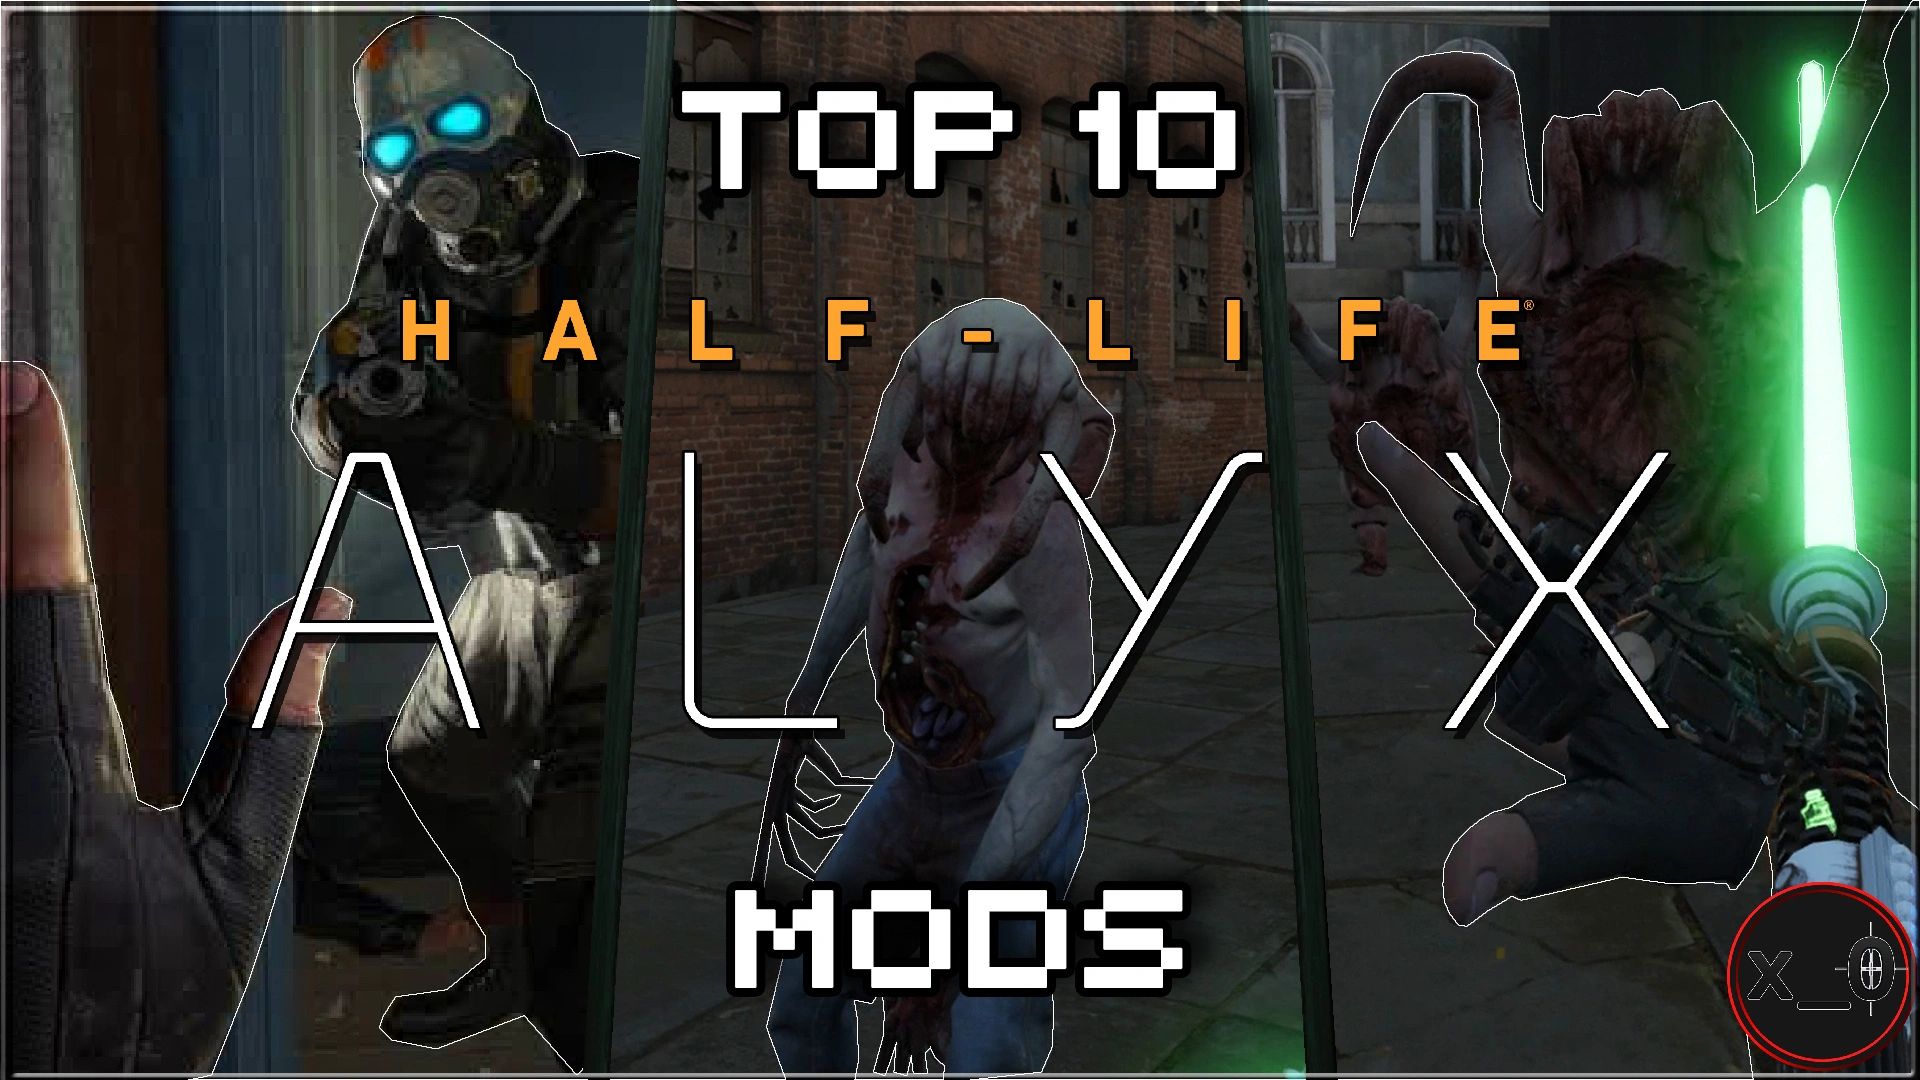 Four Half-Life single-player mods to play while you wait for Half-Life 3